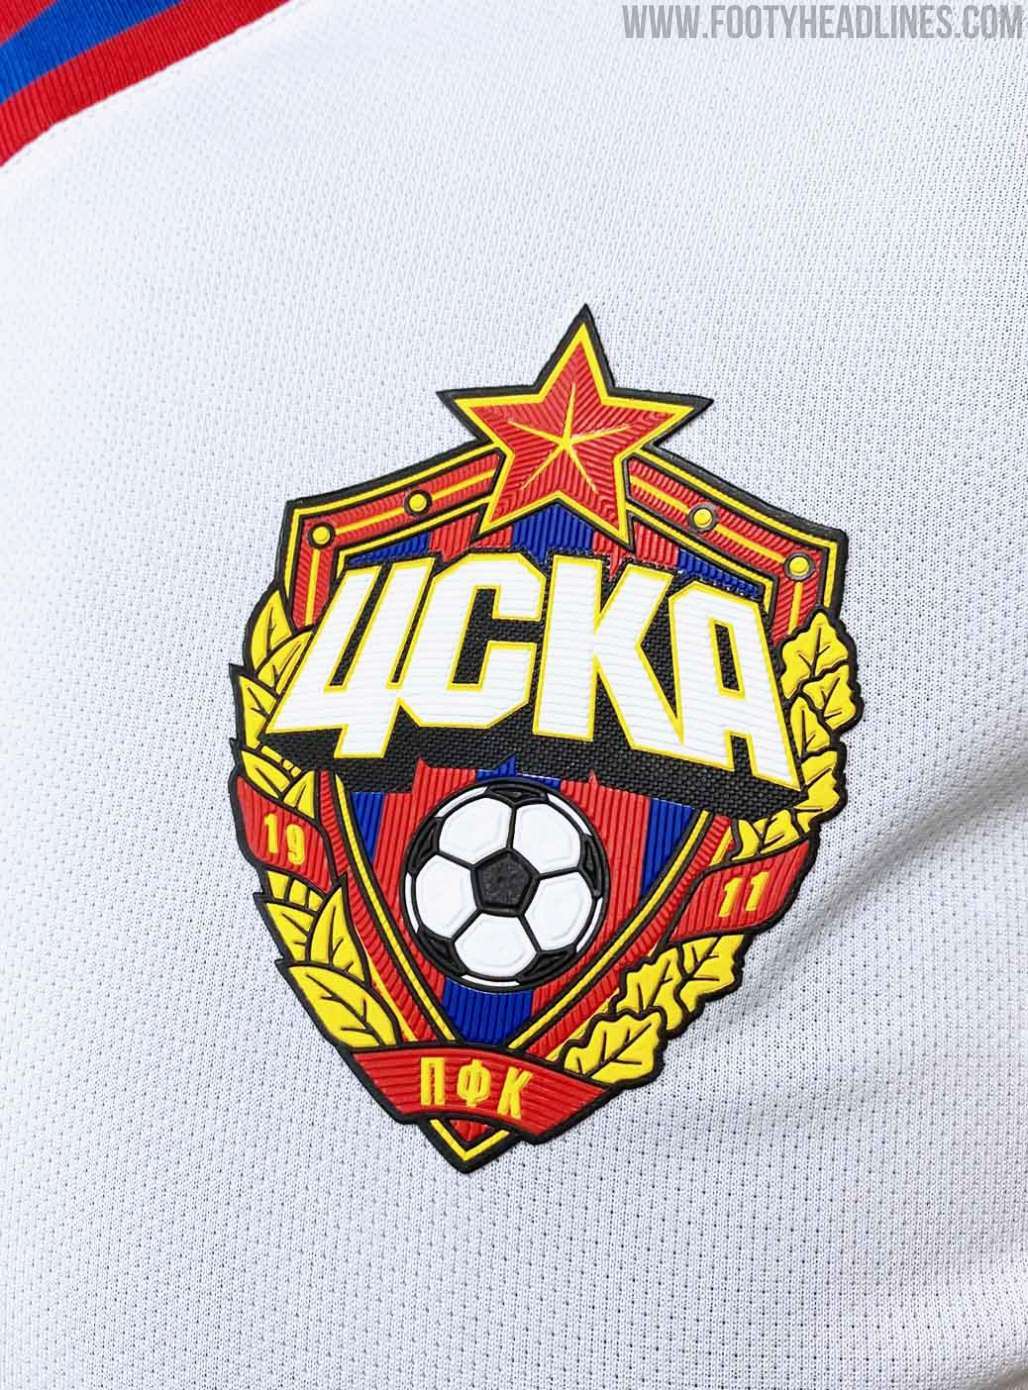 Deportivo FAS New 2023 Kit is Identical to CSKA Moscow's 2021-22 Jersey -  Footy Headlines